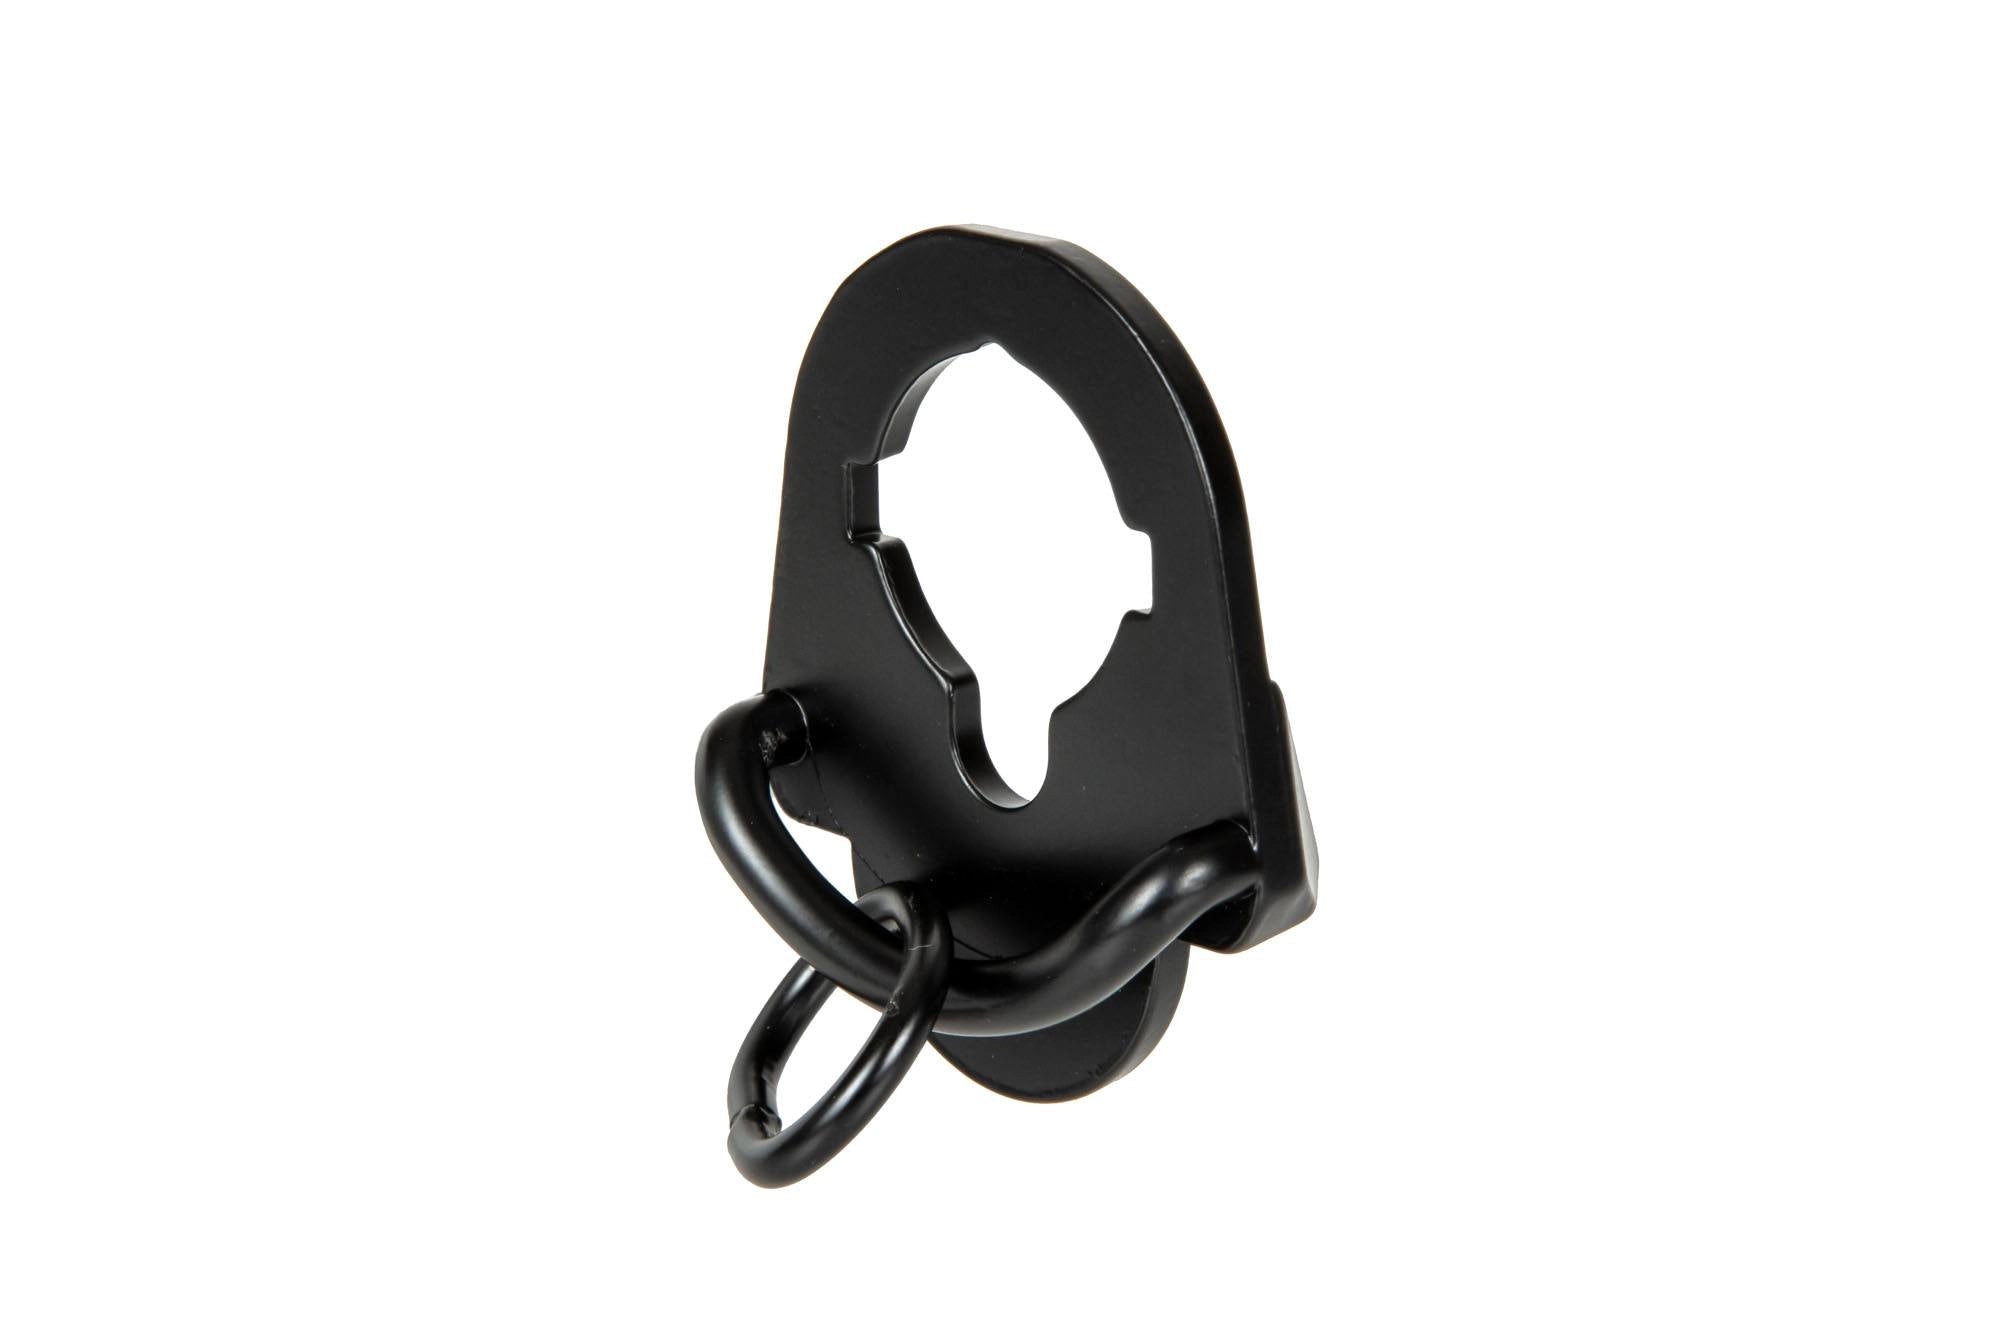 Tactical Sling Swivel for M4/M16 Replicas